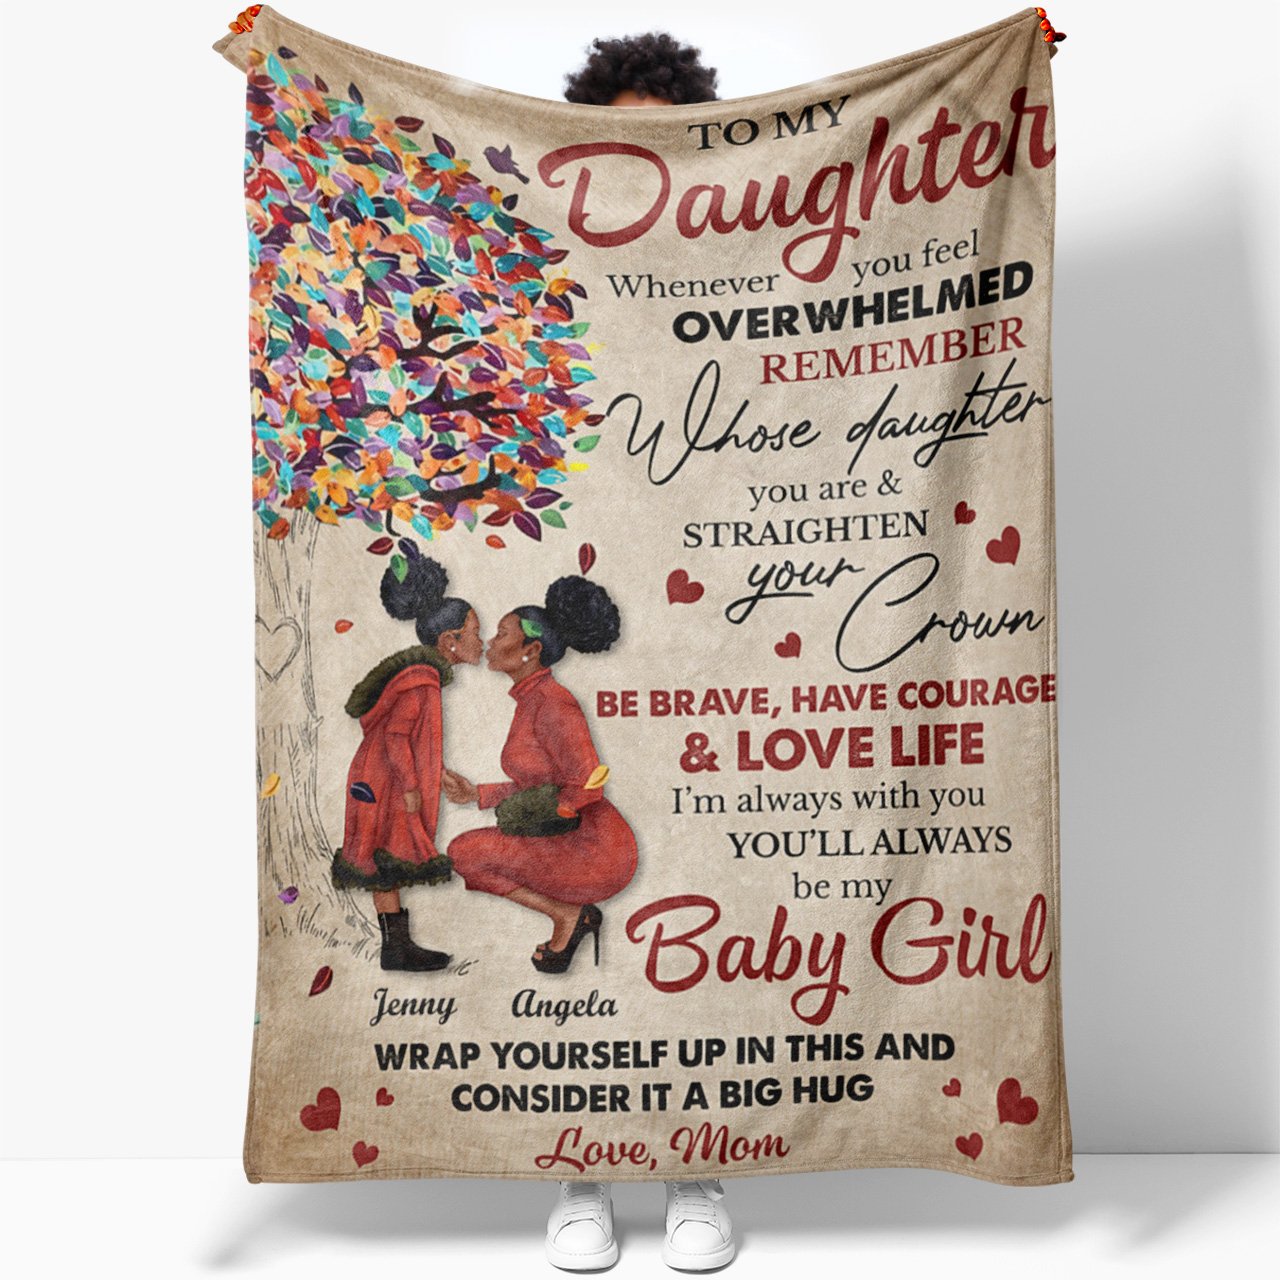 Blanket for My Black Daughter, Straighten Your Crown and Be My Baby Girl Blanket, Gifts For Adult Daughter, Mother And Daughter Gifts